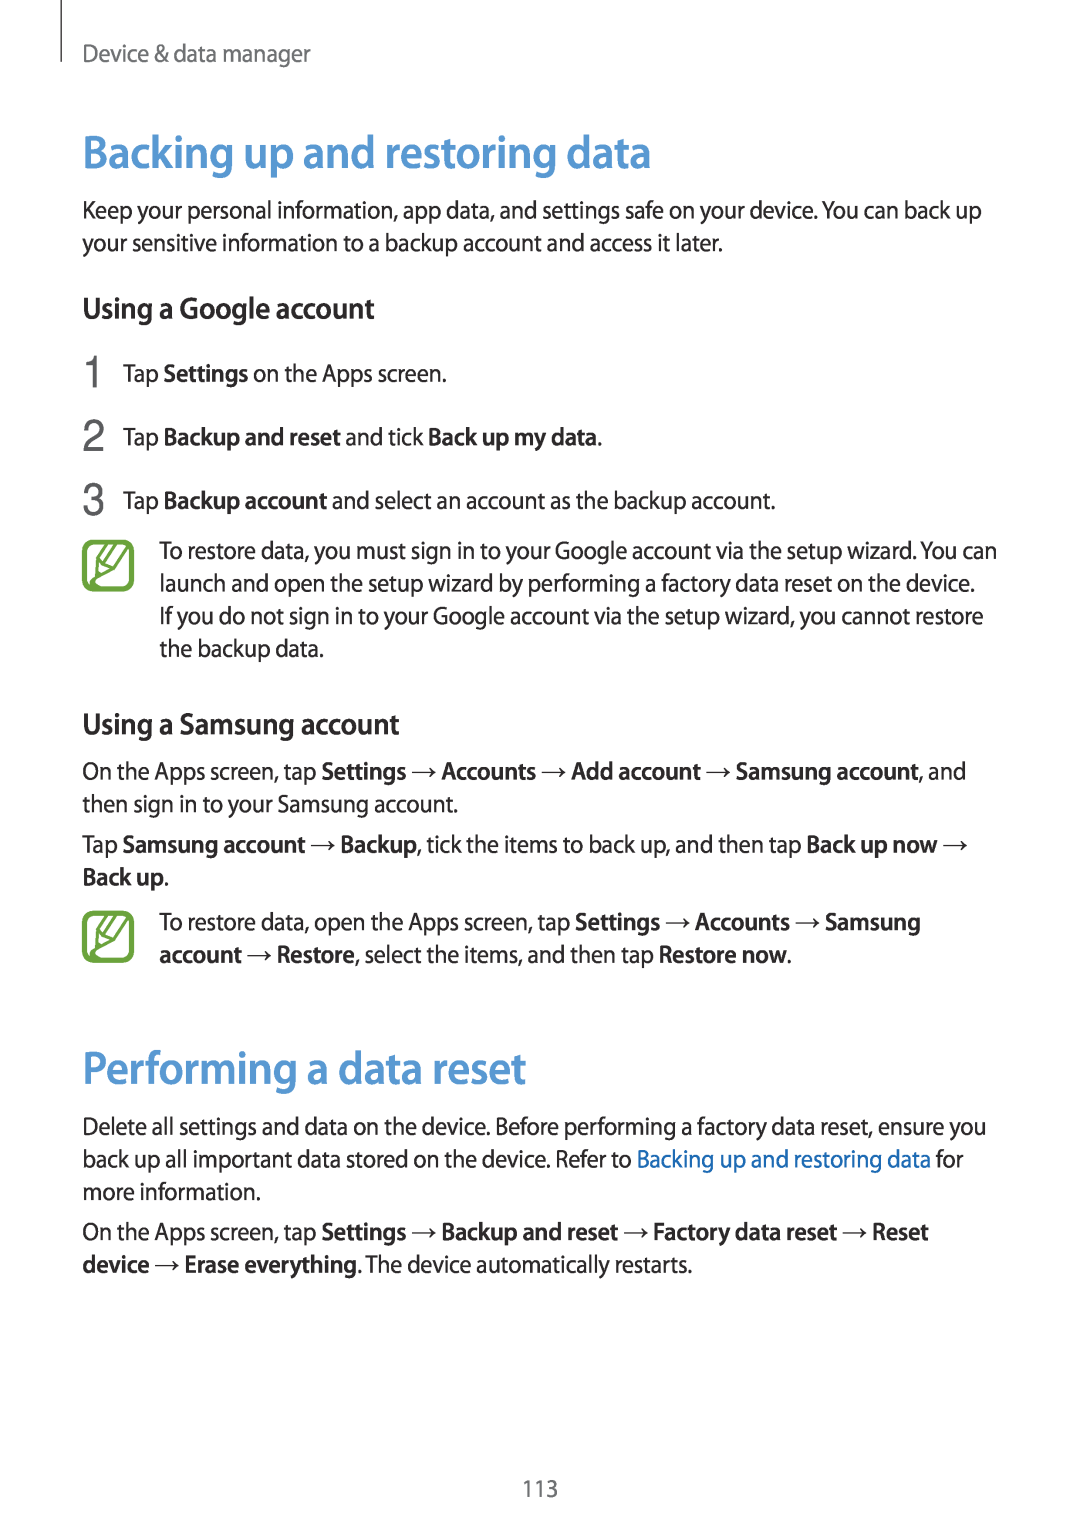 Samsung SM-A700FZWAATO, SM-A700FZKADBT manual Backing up and restoring data, Performing a data reset, Using a Google account 